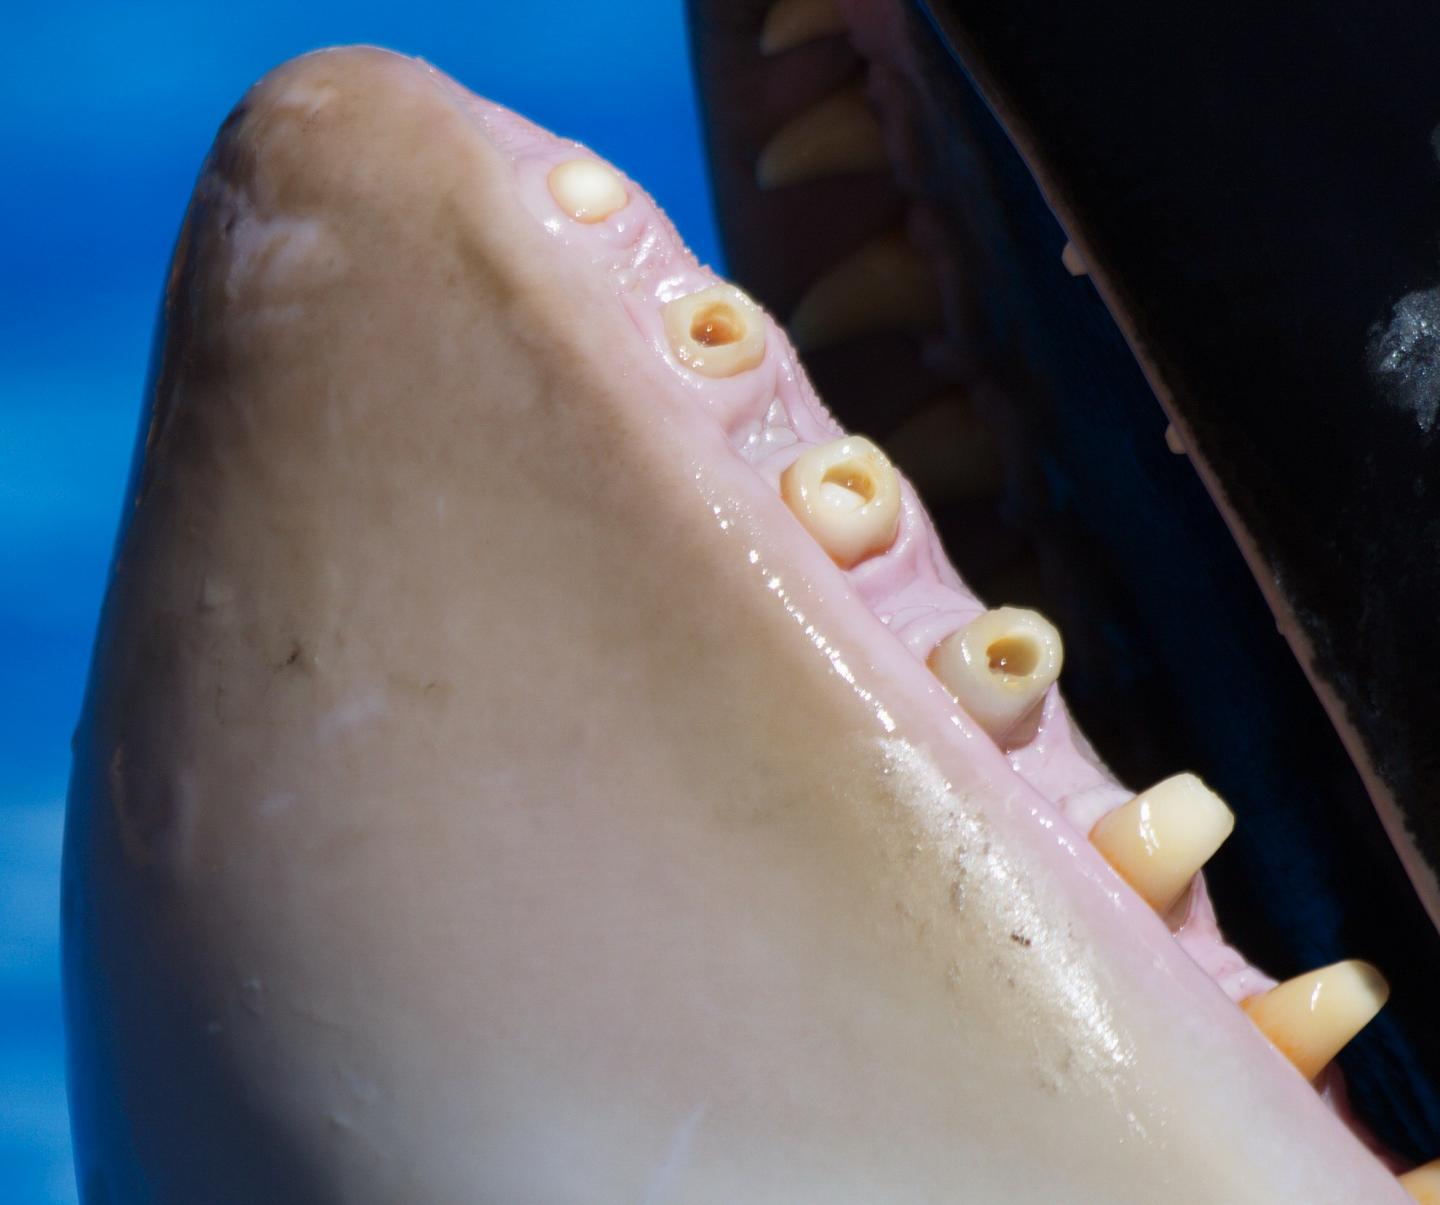 Captive Orca Whales Are So Bored They’re Destroying Their Teeth